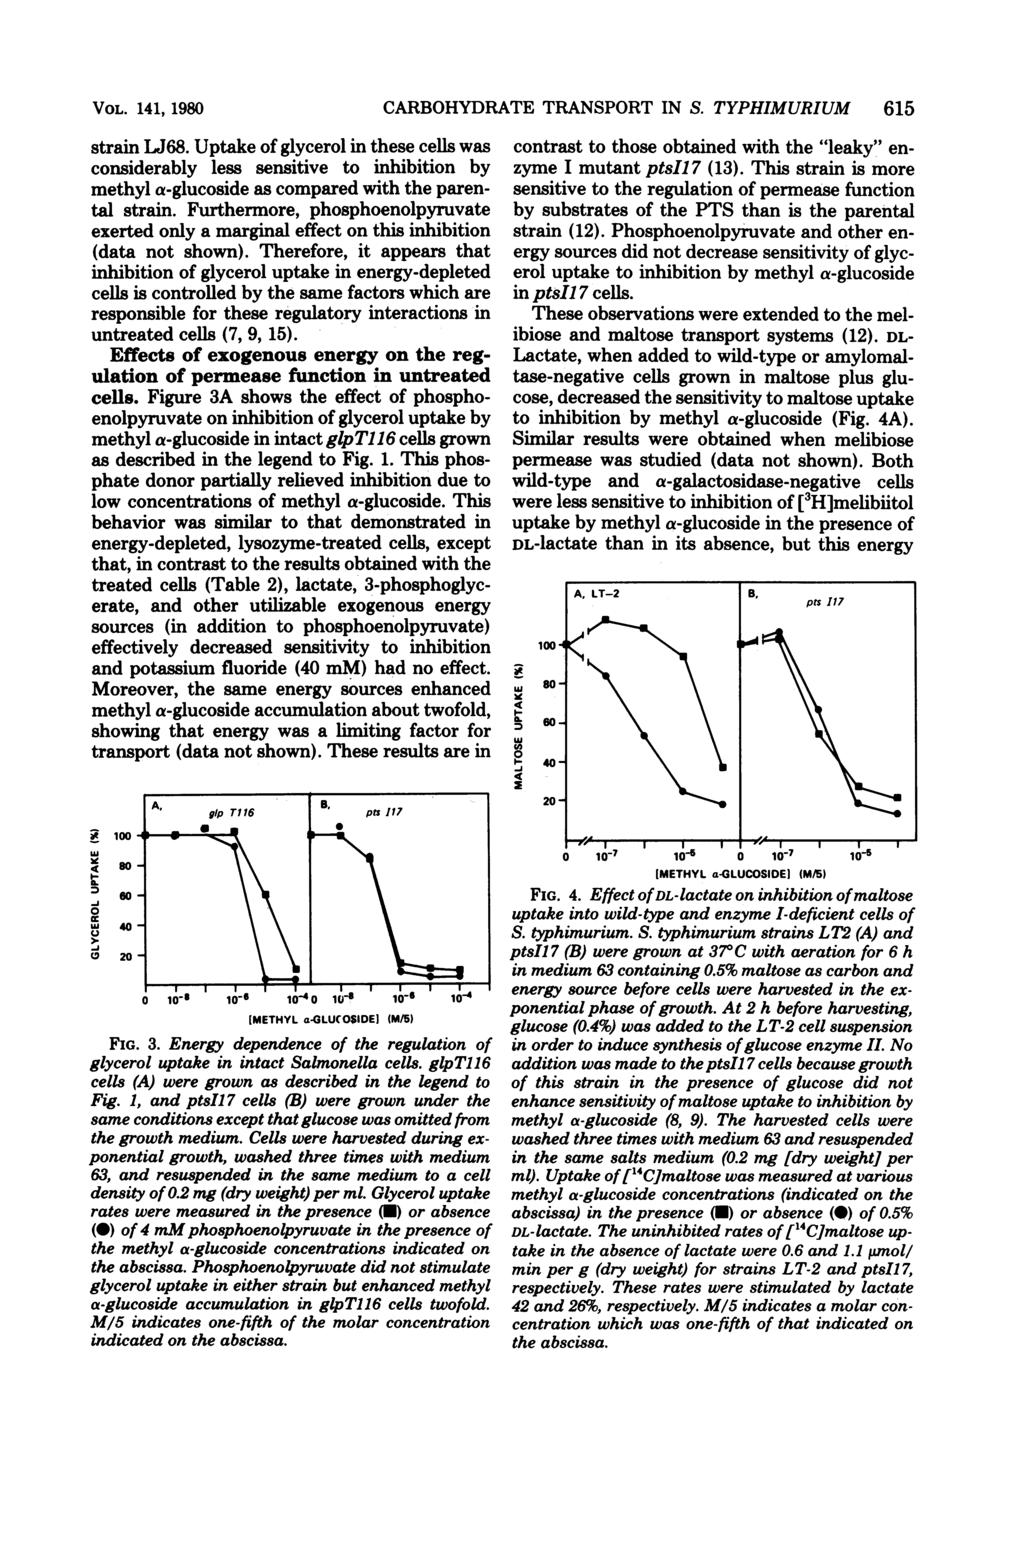 VOL. 141, 1980 strain LJ68. Uptake of glycerol in these cells was considerably less sensitive to inhibition by methyl a-glucoside as compared with the parental strain.